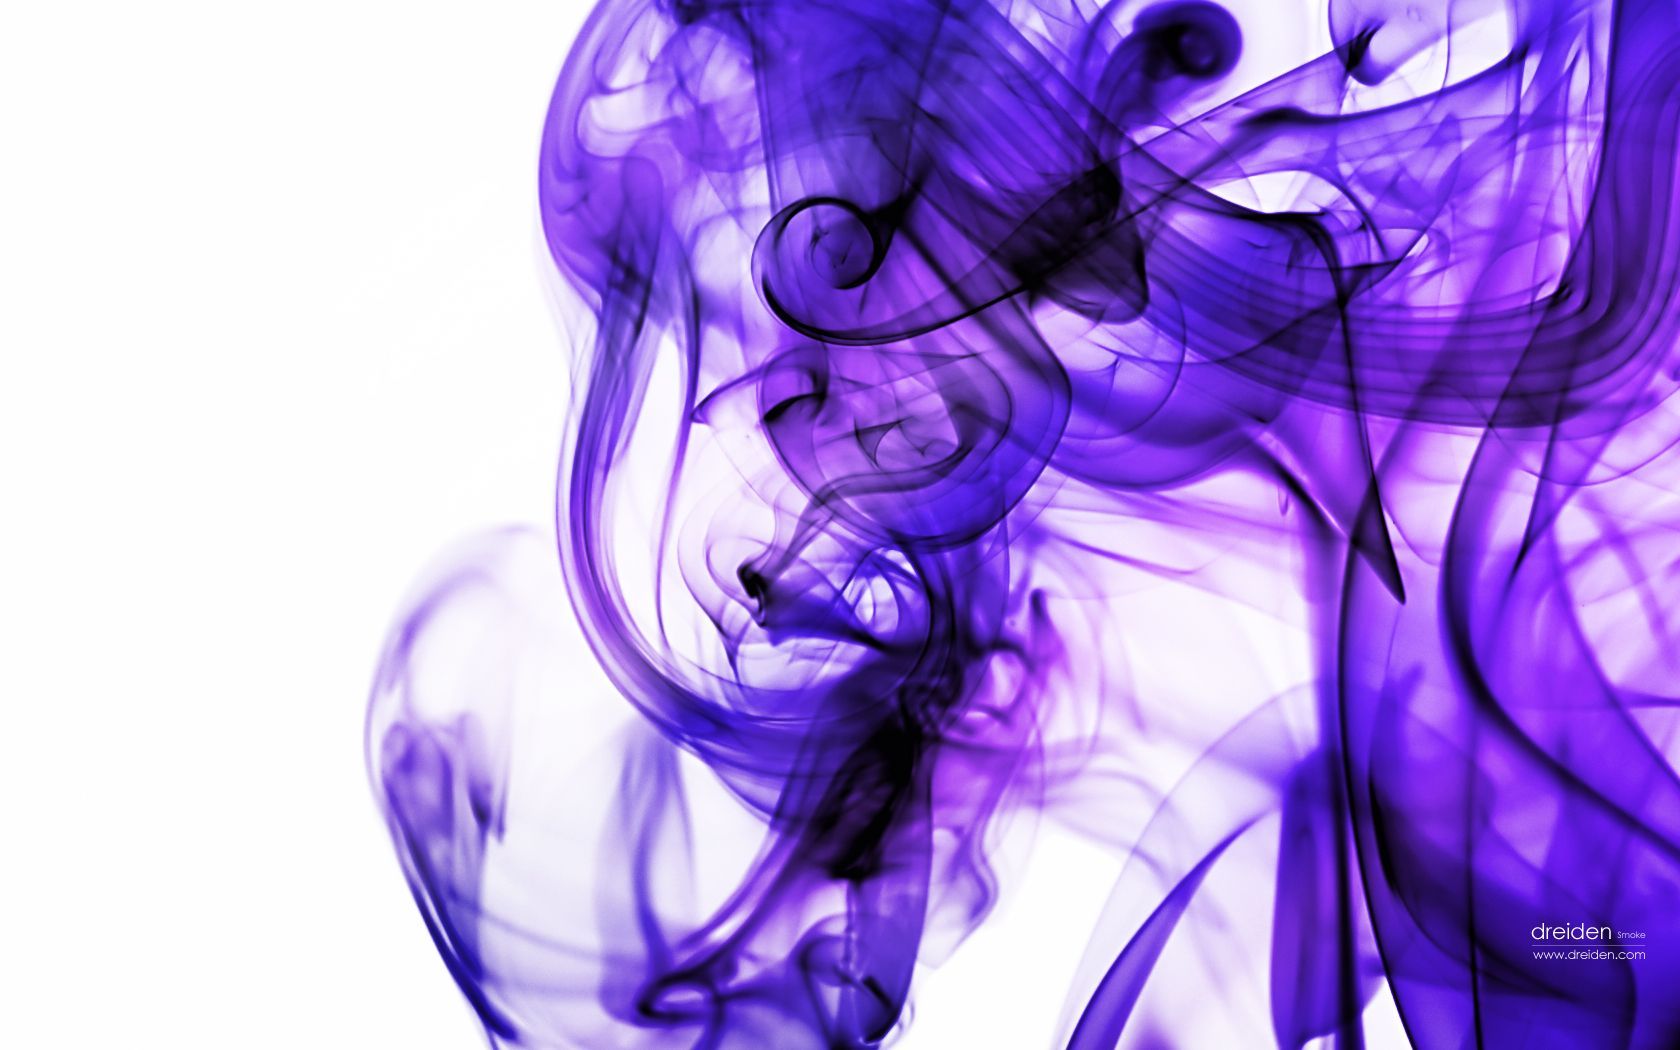 47 Smoke HD Wallpapers | Backgrounds - Wallpaper Abyss